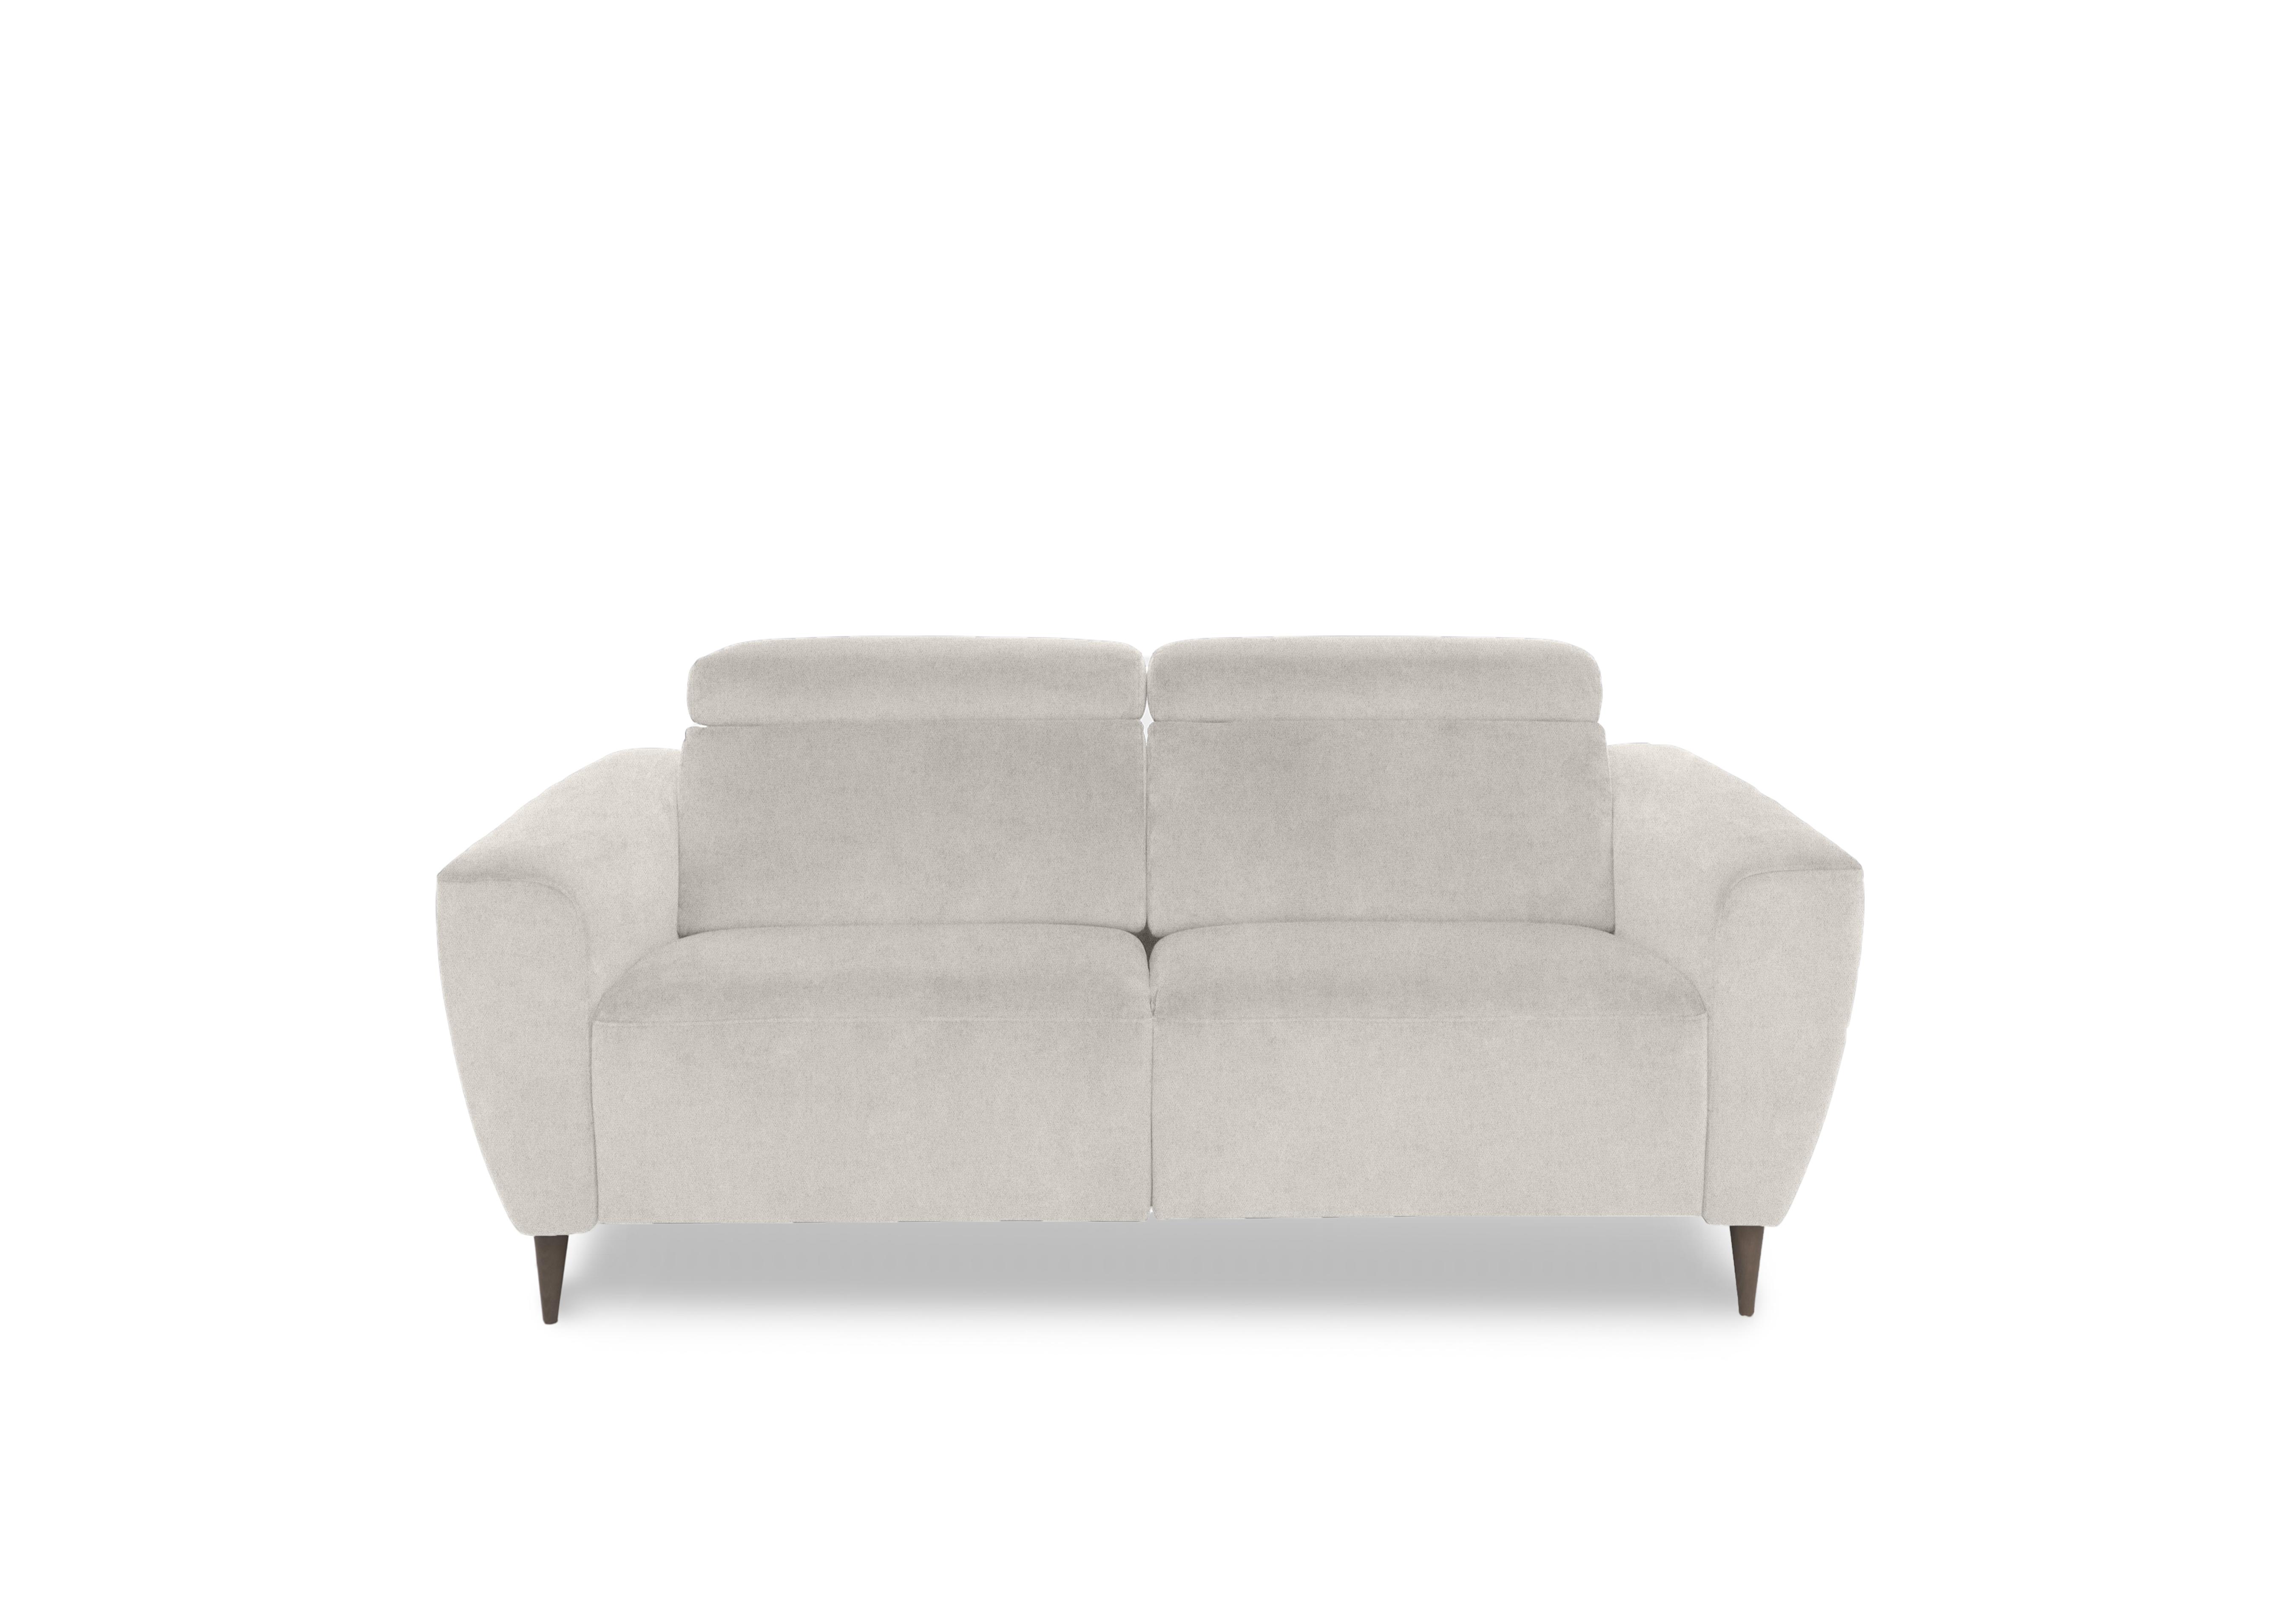 Milano 2 Seater Fabric Sofa in Fuente Beige To Ft on Furniture Village